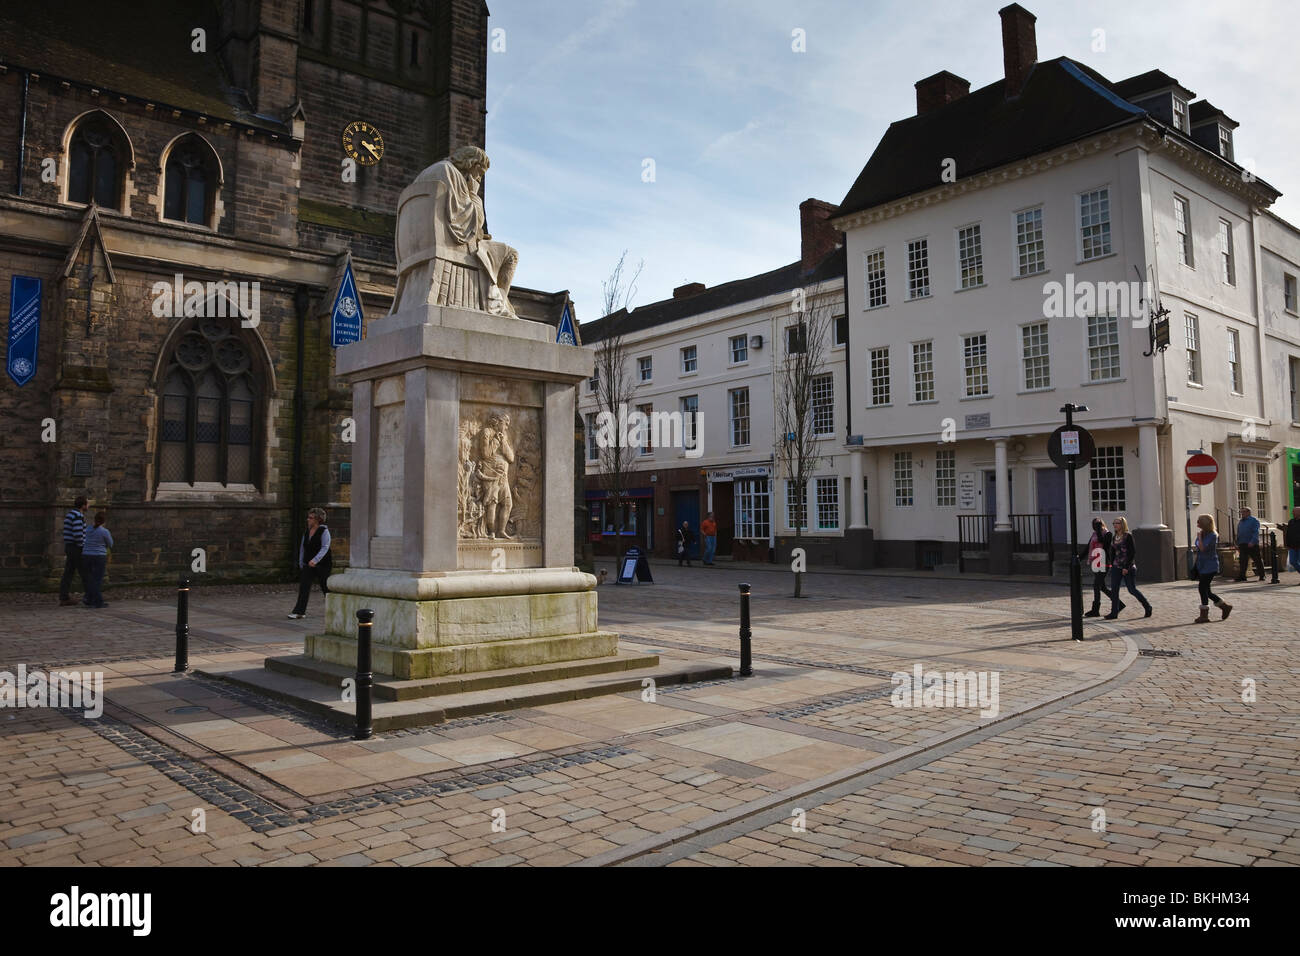 Johnson Birthplace Museum and Statue of Dr Samuel Johnson in the Market Square, Lichfield, Staffordshire. Stock Photo